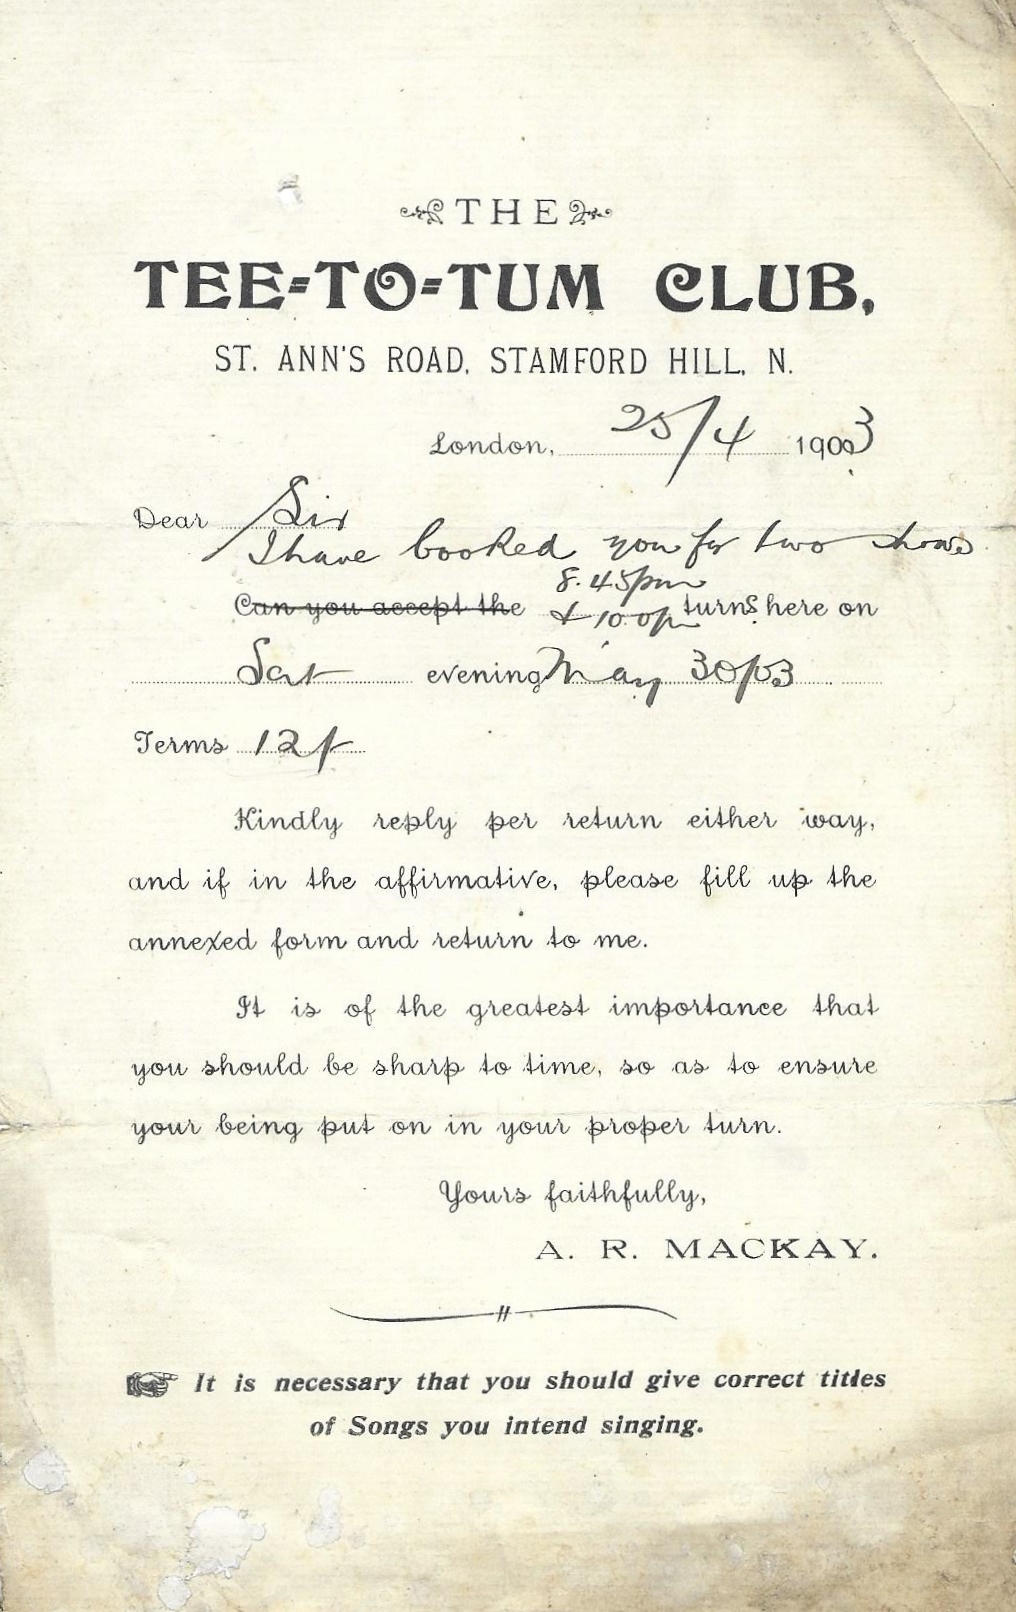 Booking form from the Tee-To-Tum Club to Lewis Davenport, 1903